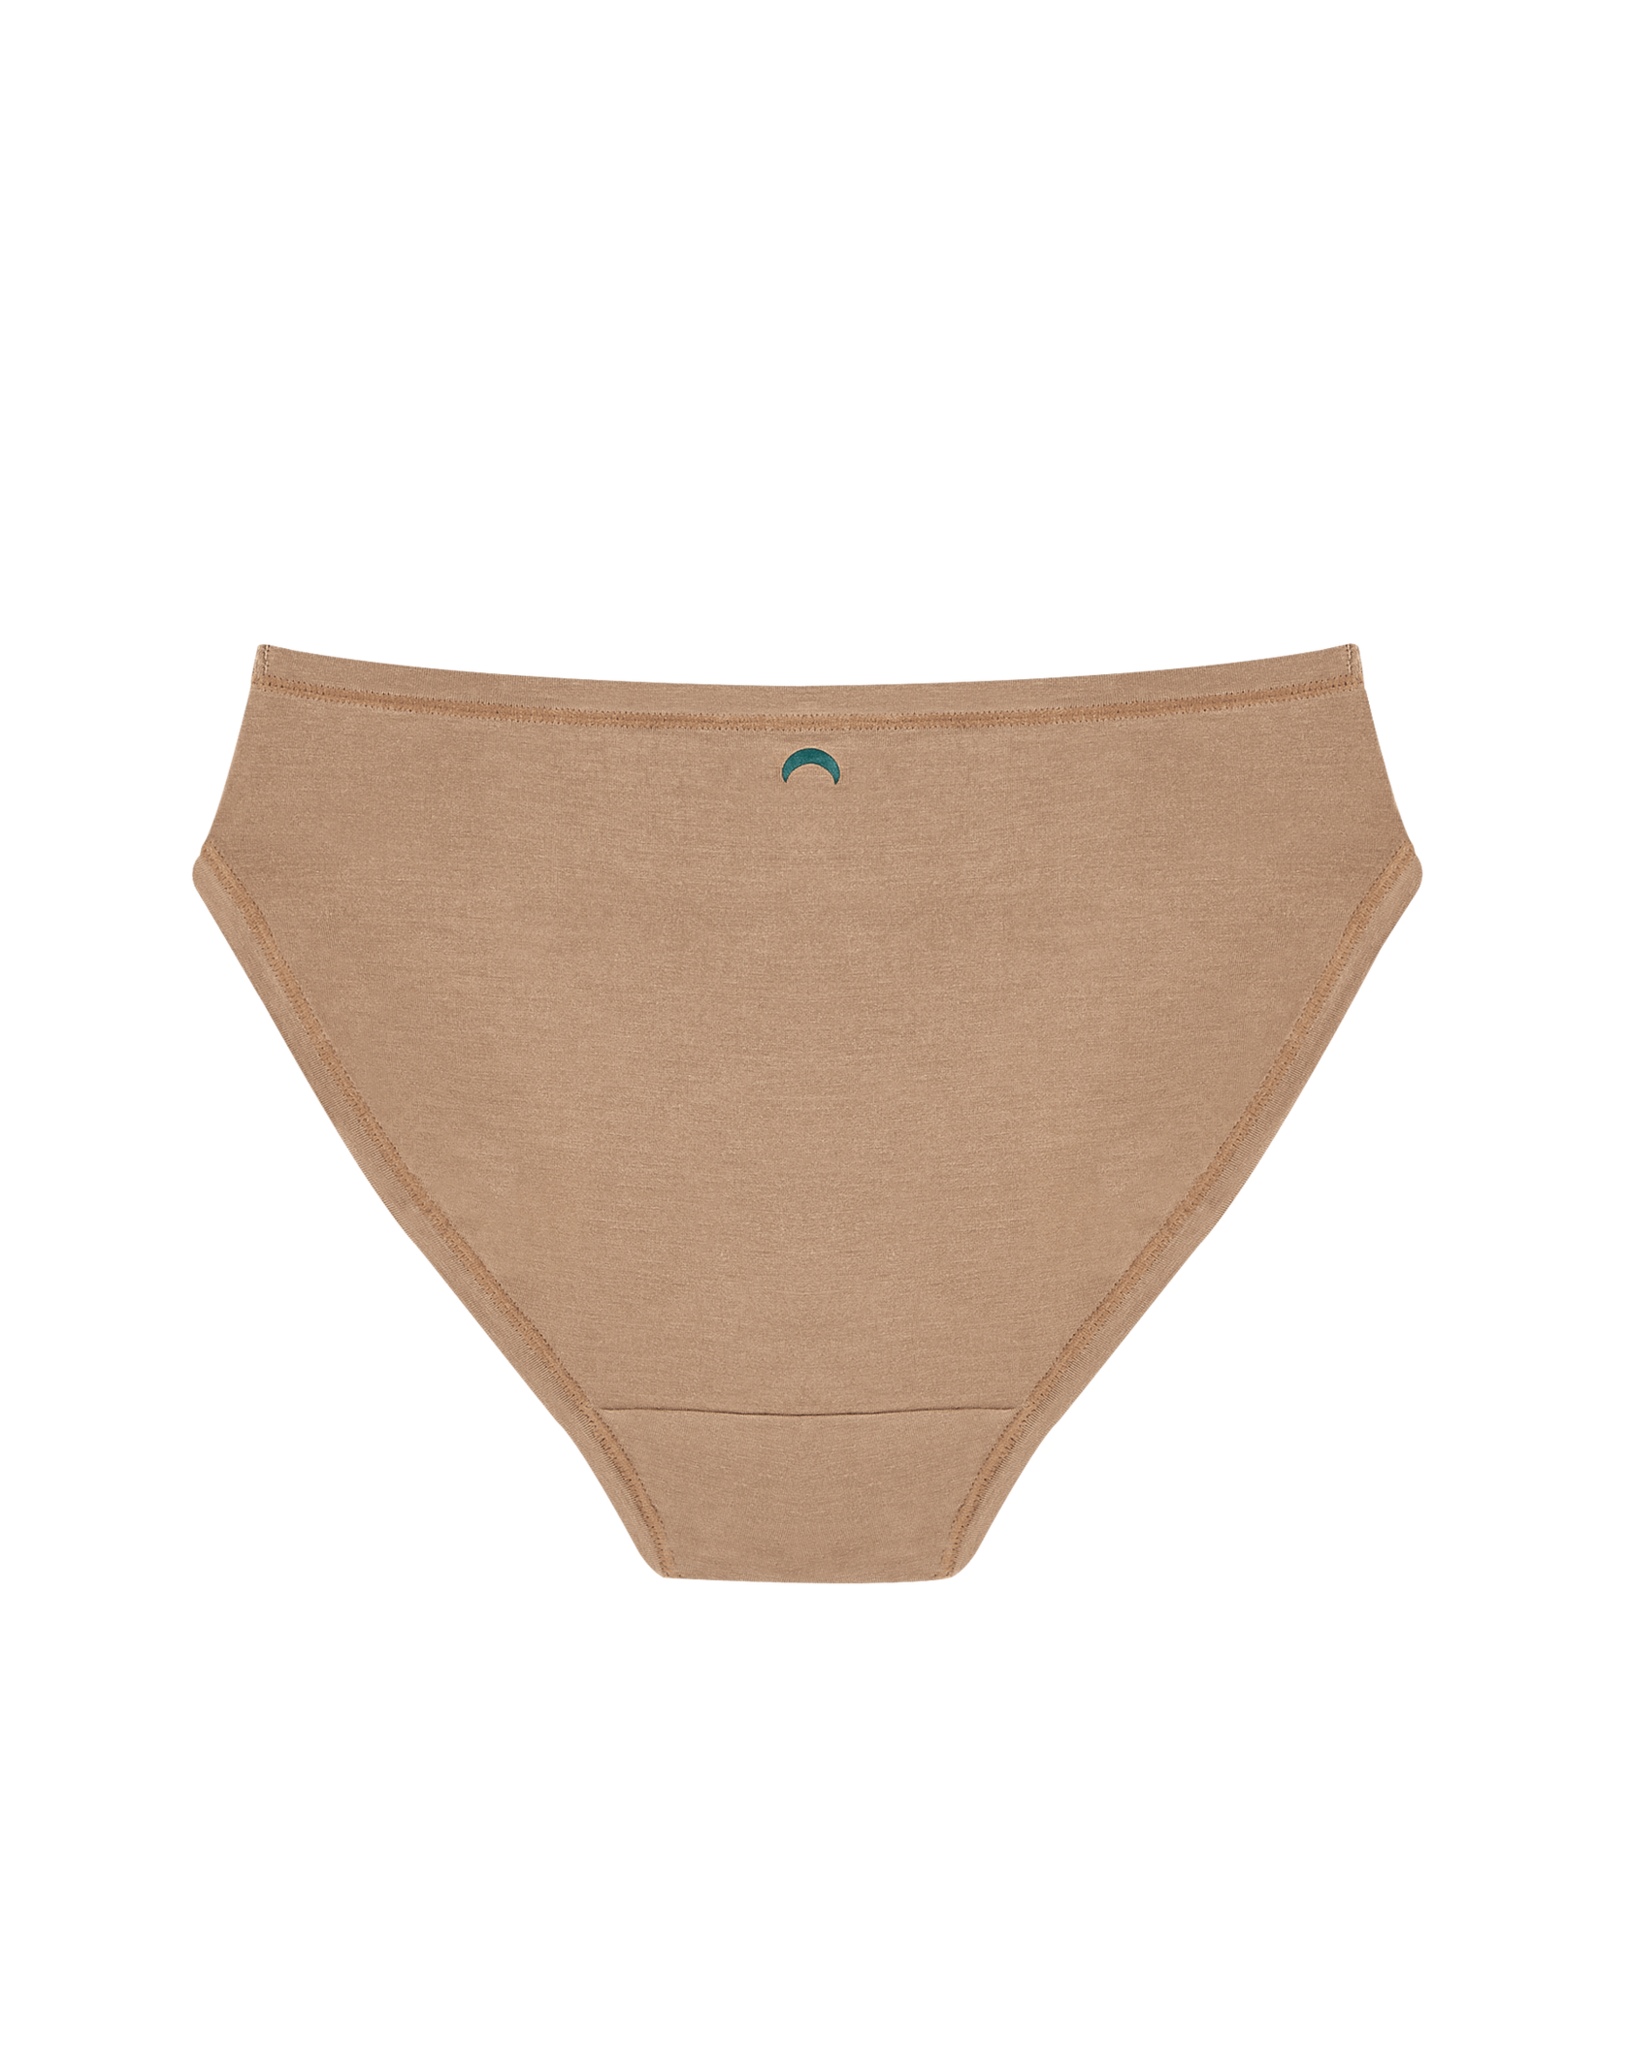 Mineral Undies High Rise Thong - The Cove Boutique